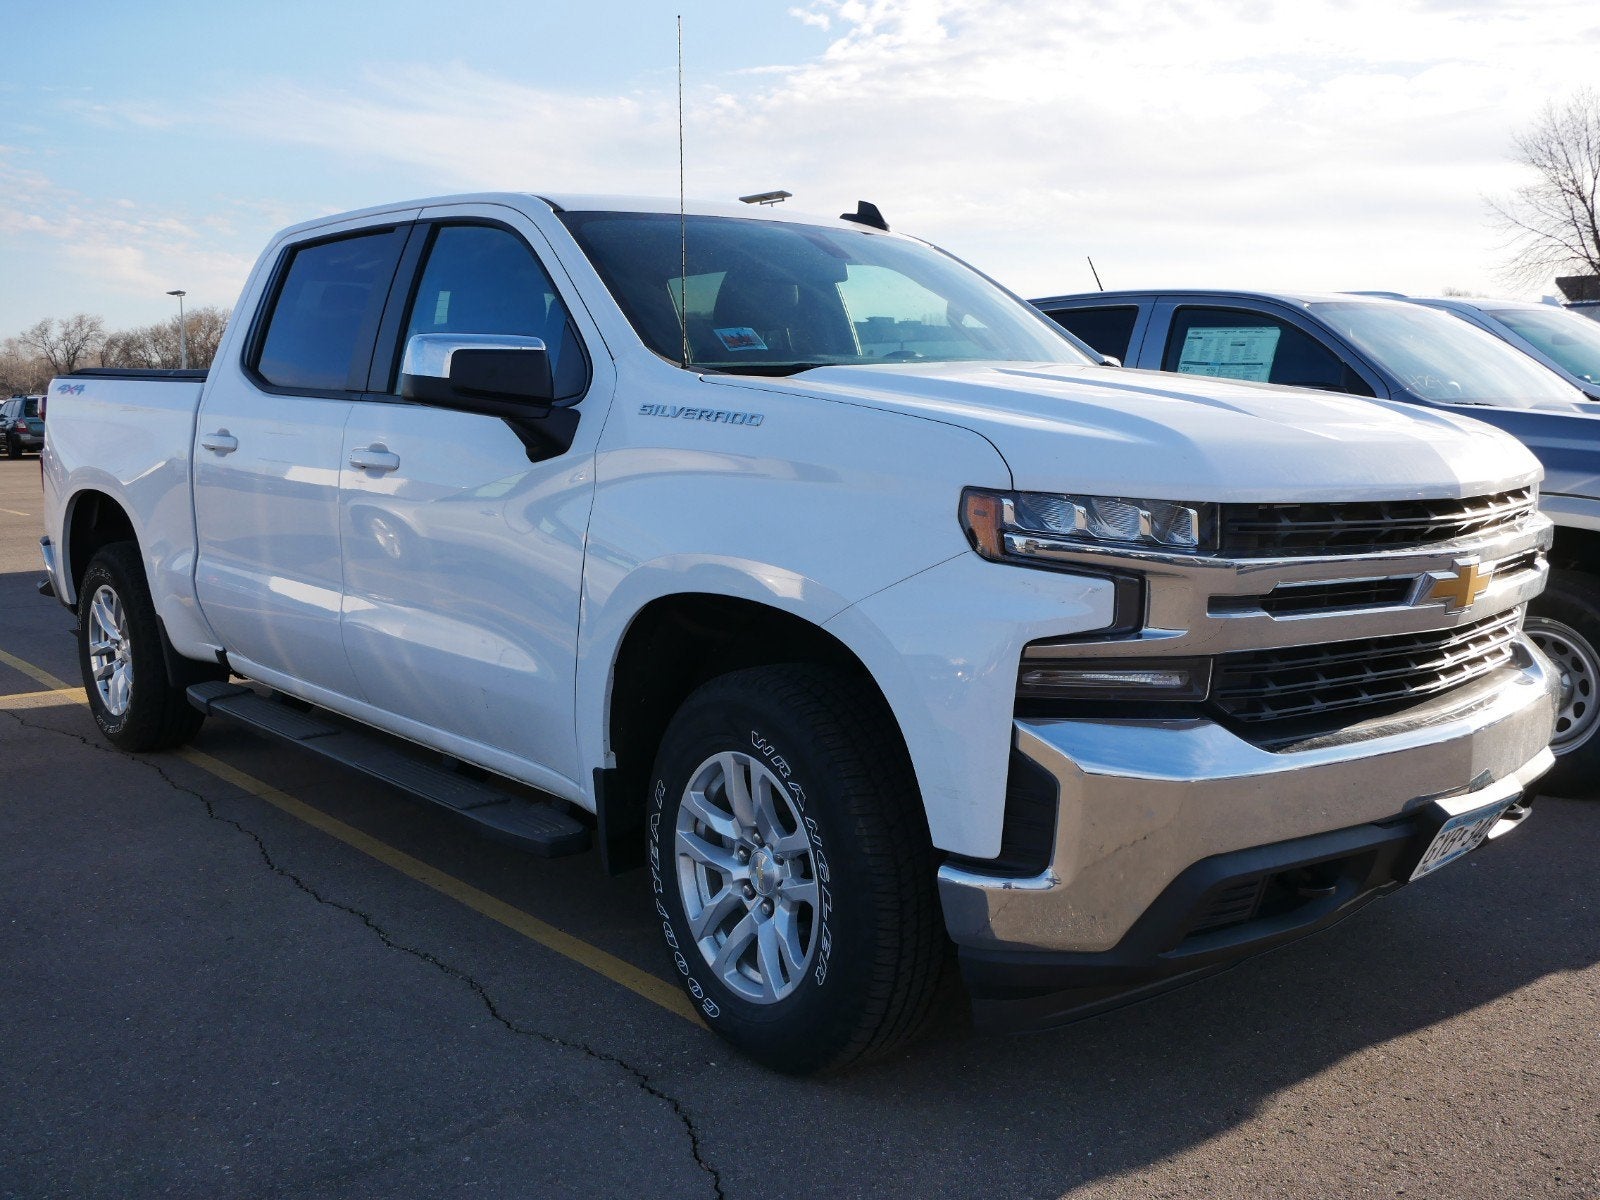 Used 2021 Chevrolet Silverado 1500 LT with VIN 3GCUYDED4MG330142 for sale in Fridley, Minnesota